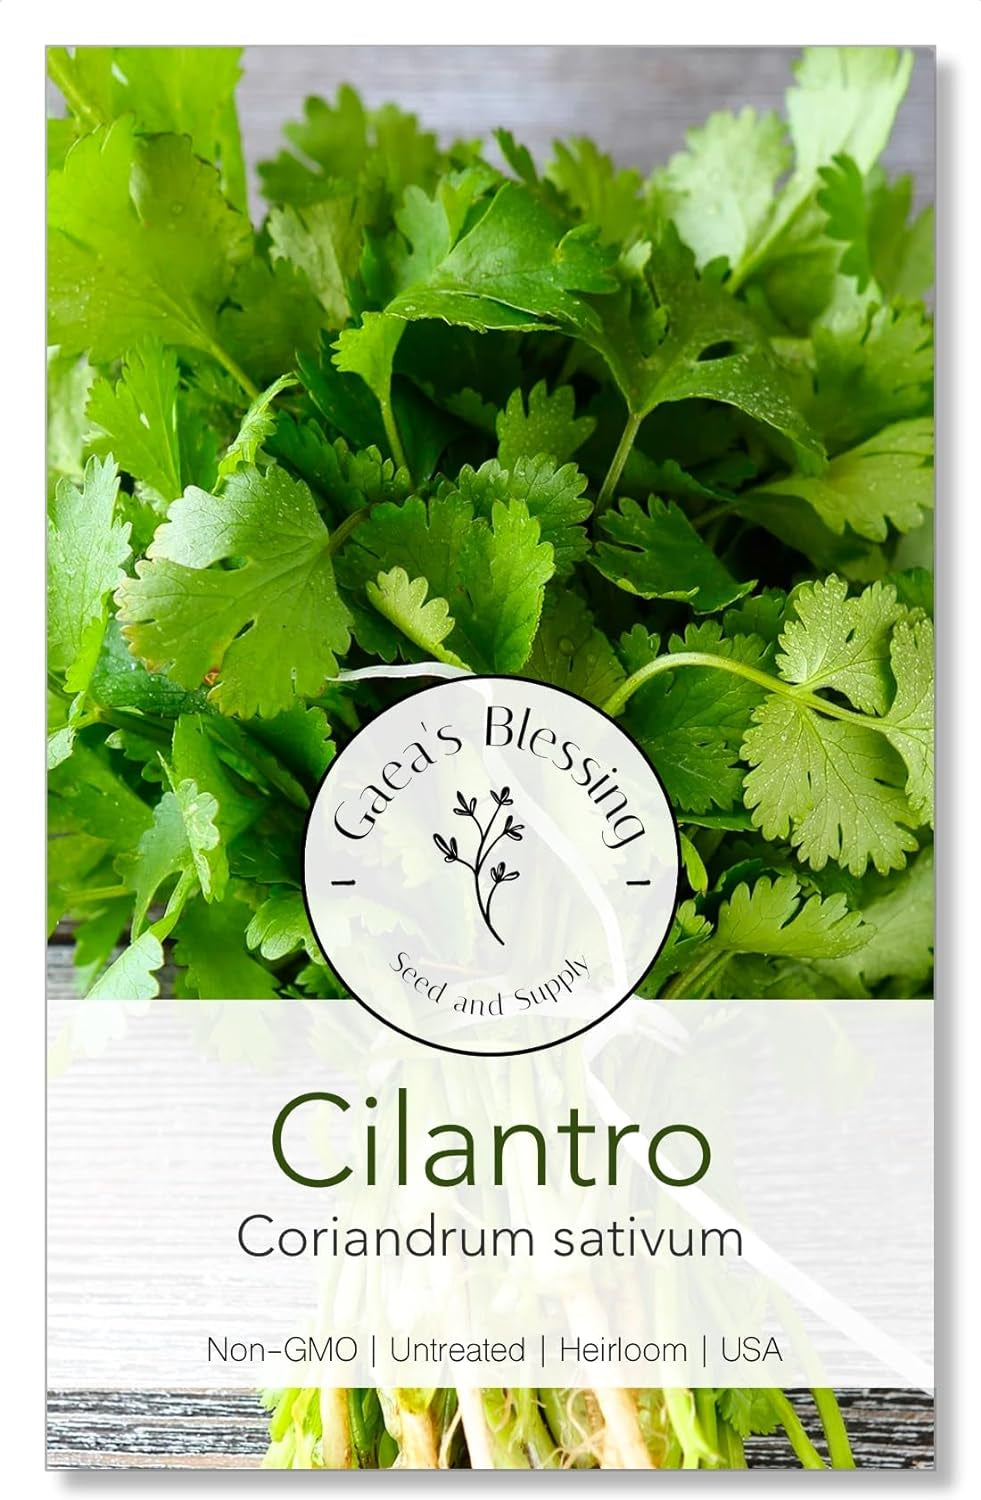 Seeds - Cilantro Seeds - Non-Gmo Heirloom Seeds with Easy to Follow Instructions - Leisure Coriander Heirloom - 90% Germination Rate (Single Pack)